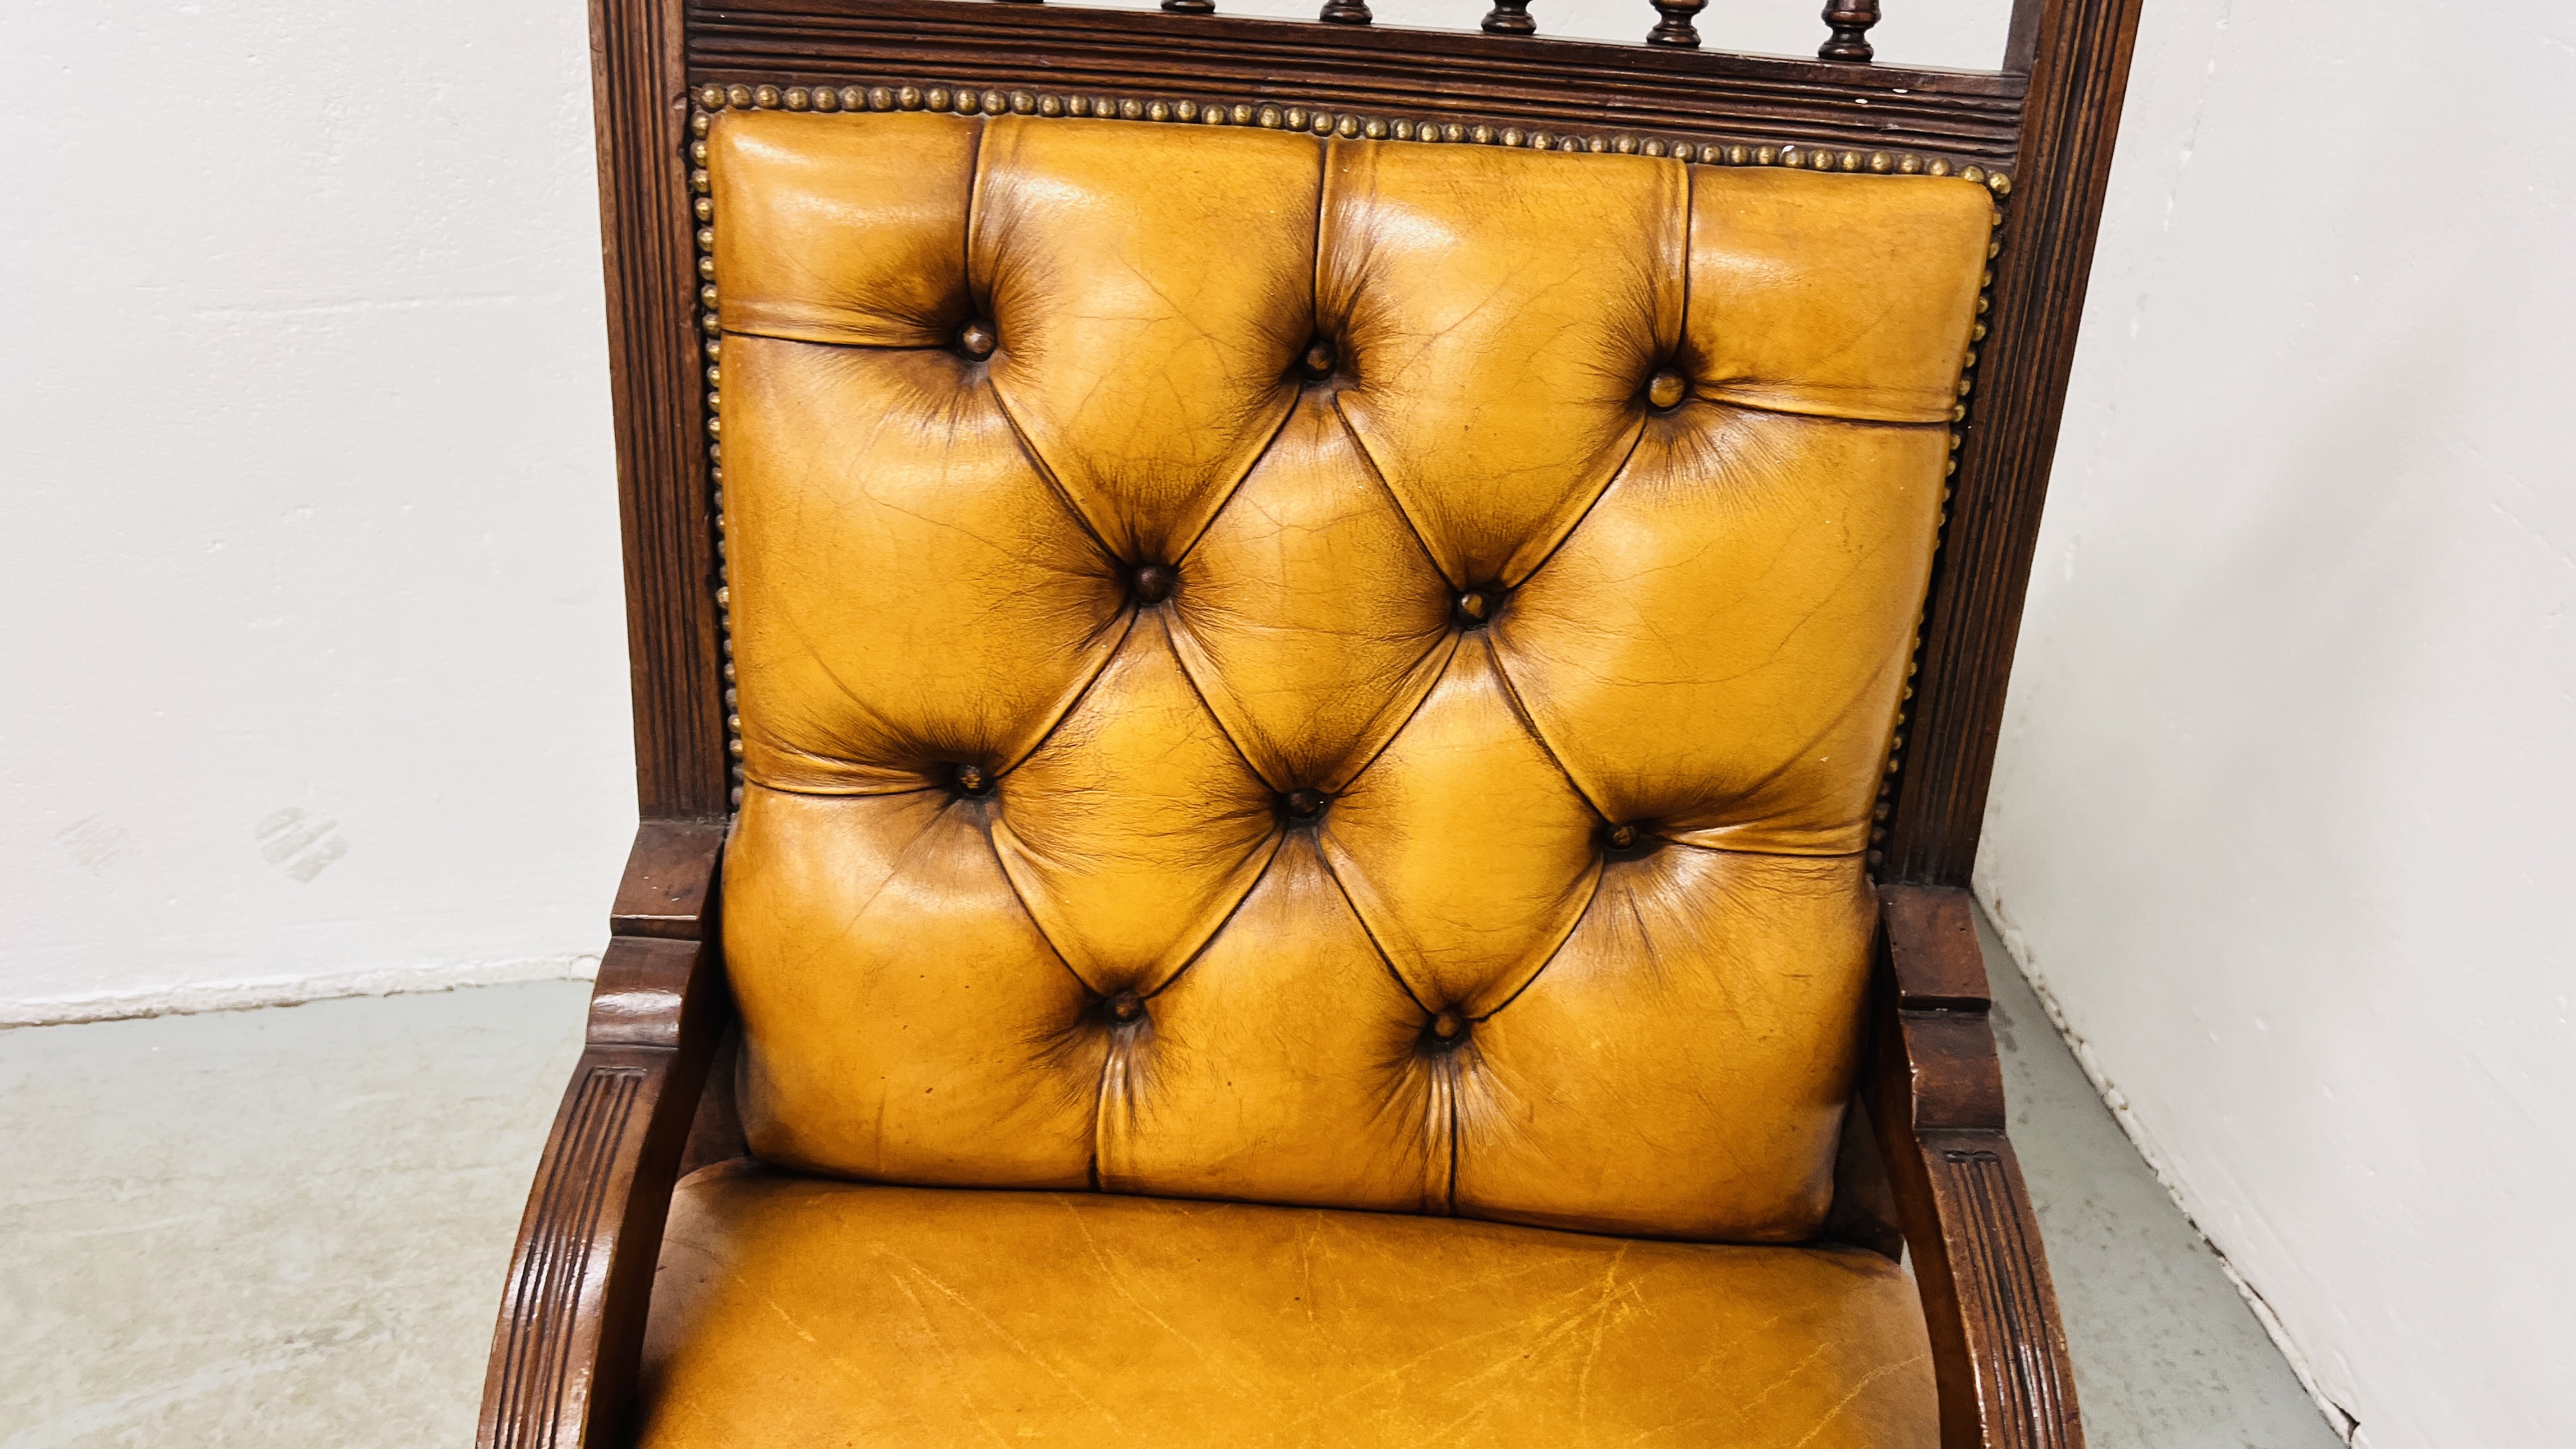 ANTIQUE EDWARDIAN MAHOGANY LOW CHAIR UPHOLSTERED IN TAN LEATHER - BUTTON BACK. - Image 4 of 12